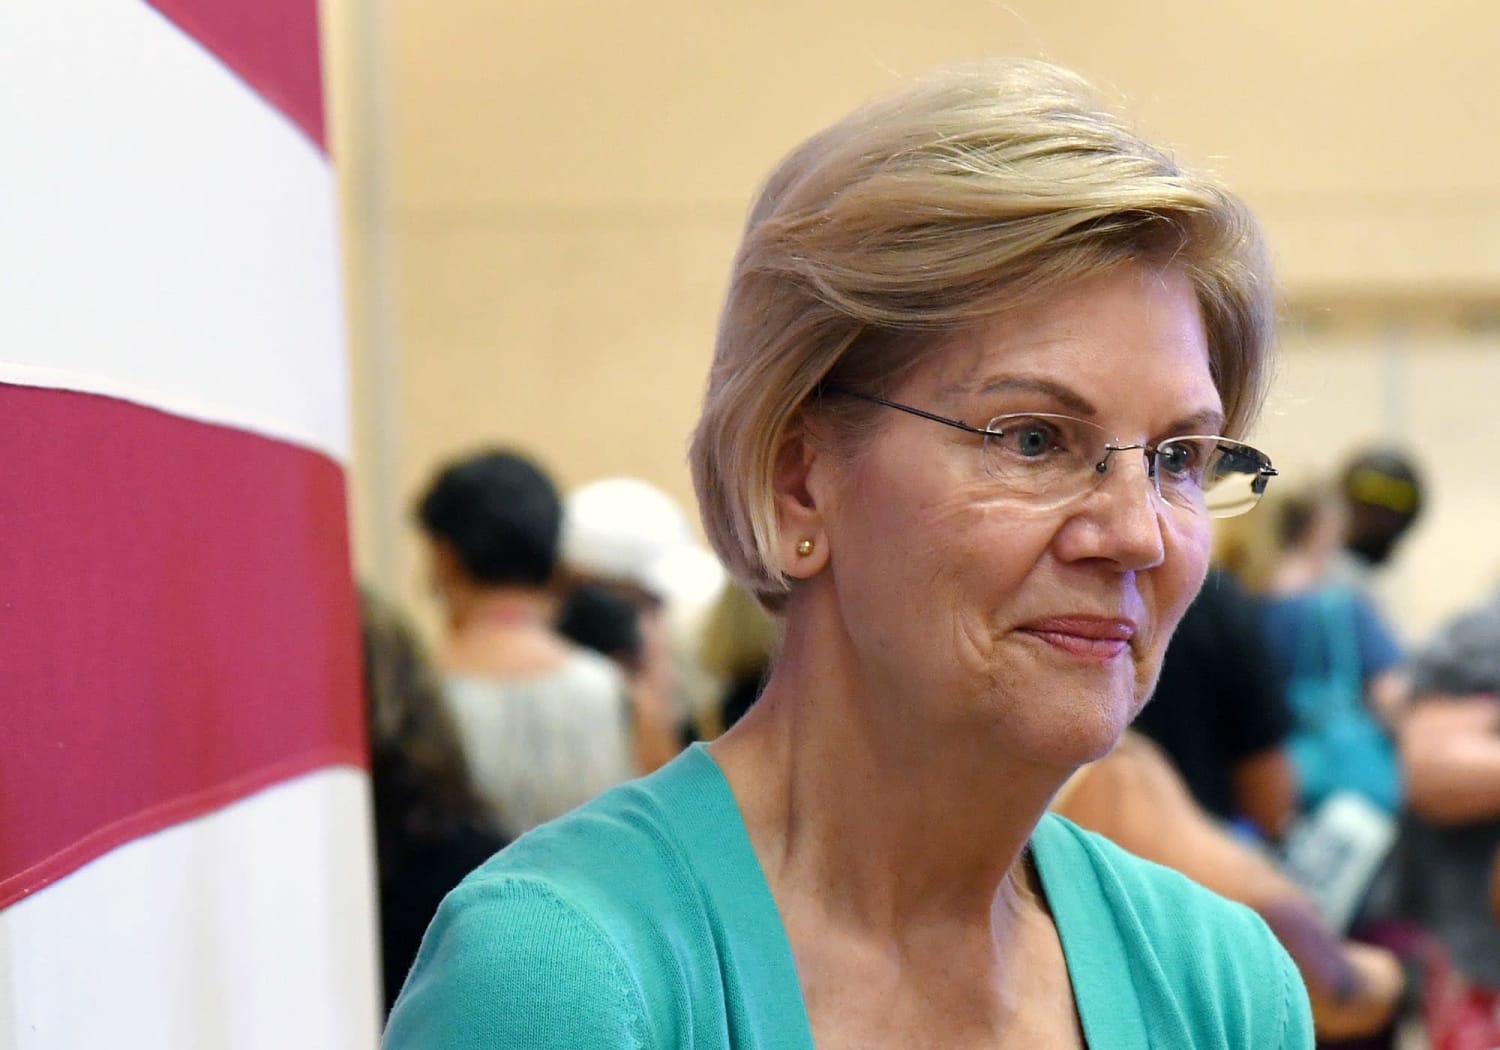 Elizabeth Warren went to college for $50 a semester, 'but the chances I got don't exist anymore'